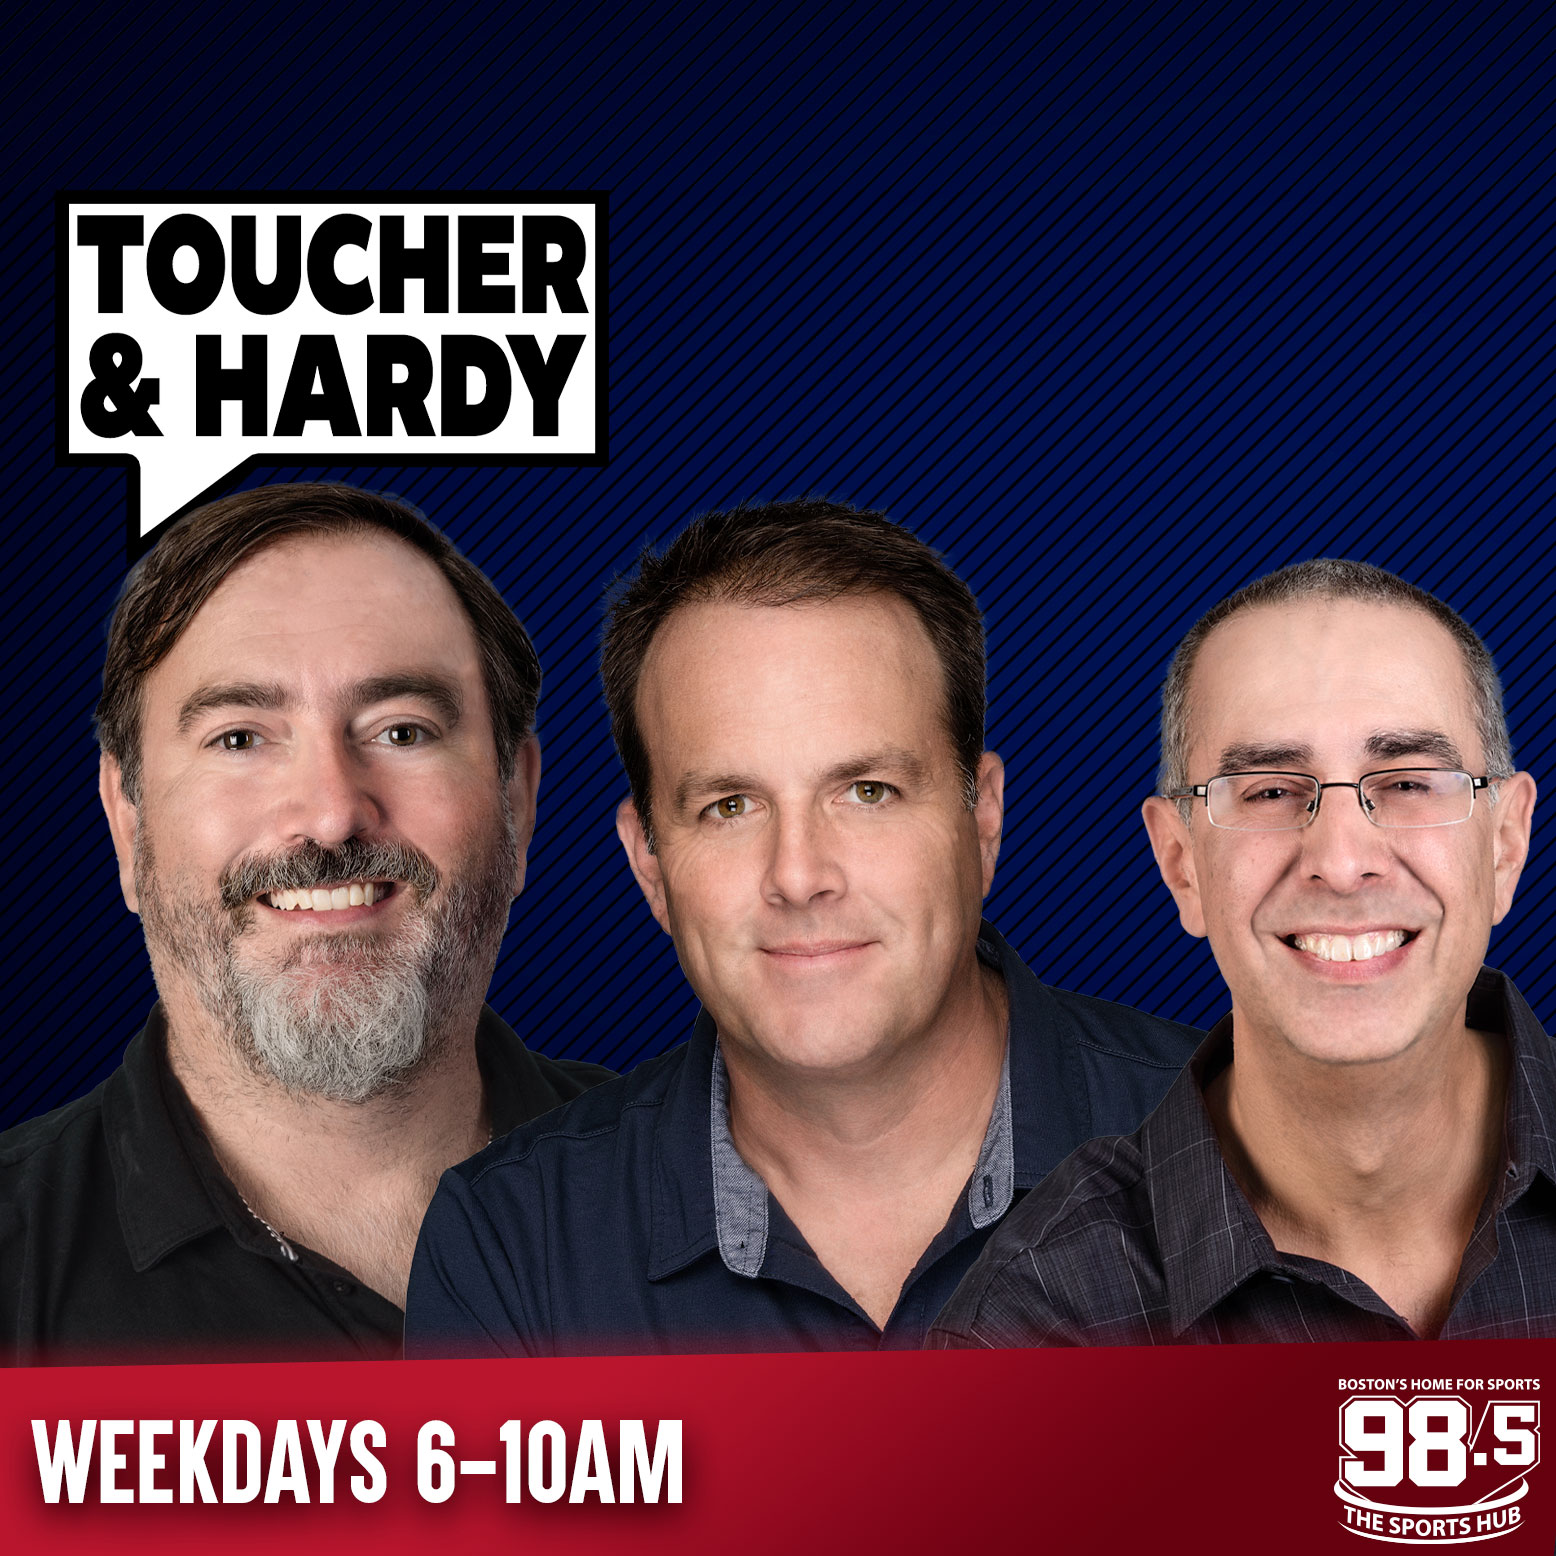 John Sterling’s retirement ceremony | ESPN’s Mike Reiss joins Toucher & Hardy | Hardy’s daughter’s flat tire - 4/22 (Hour 2)